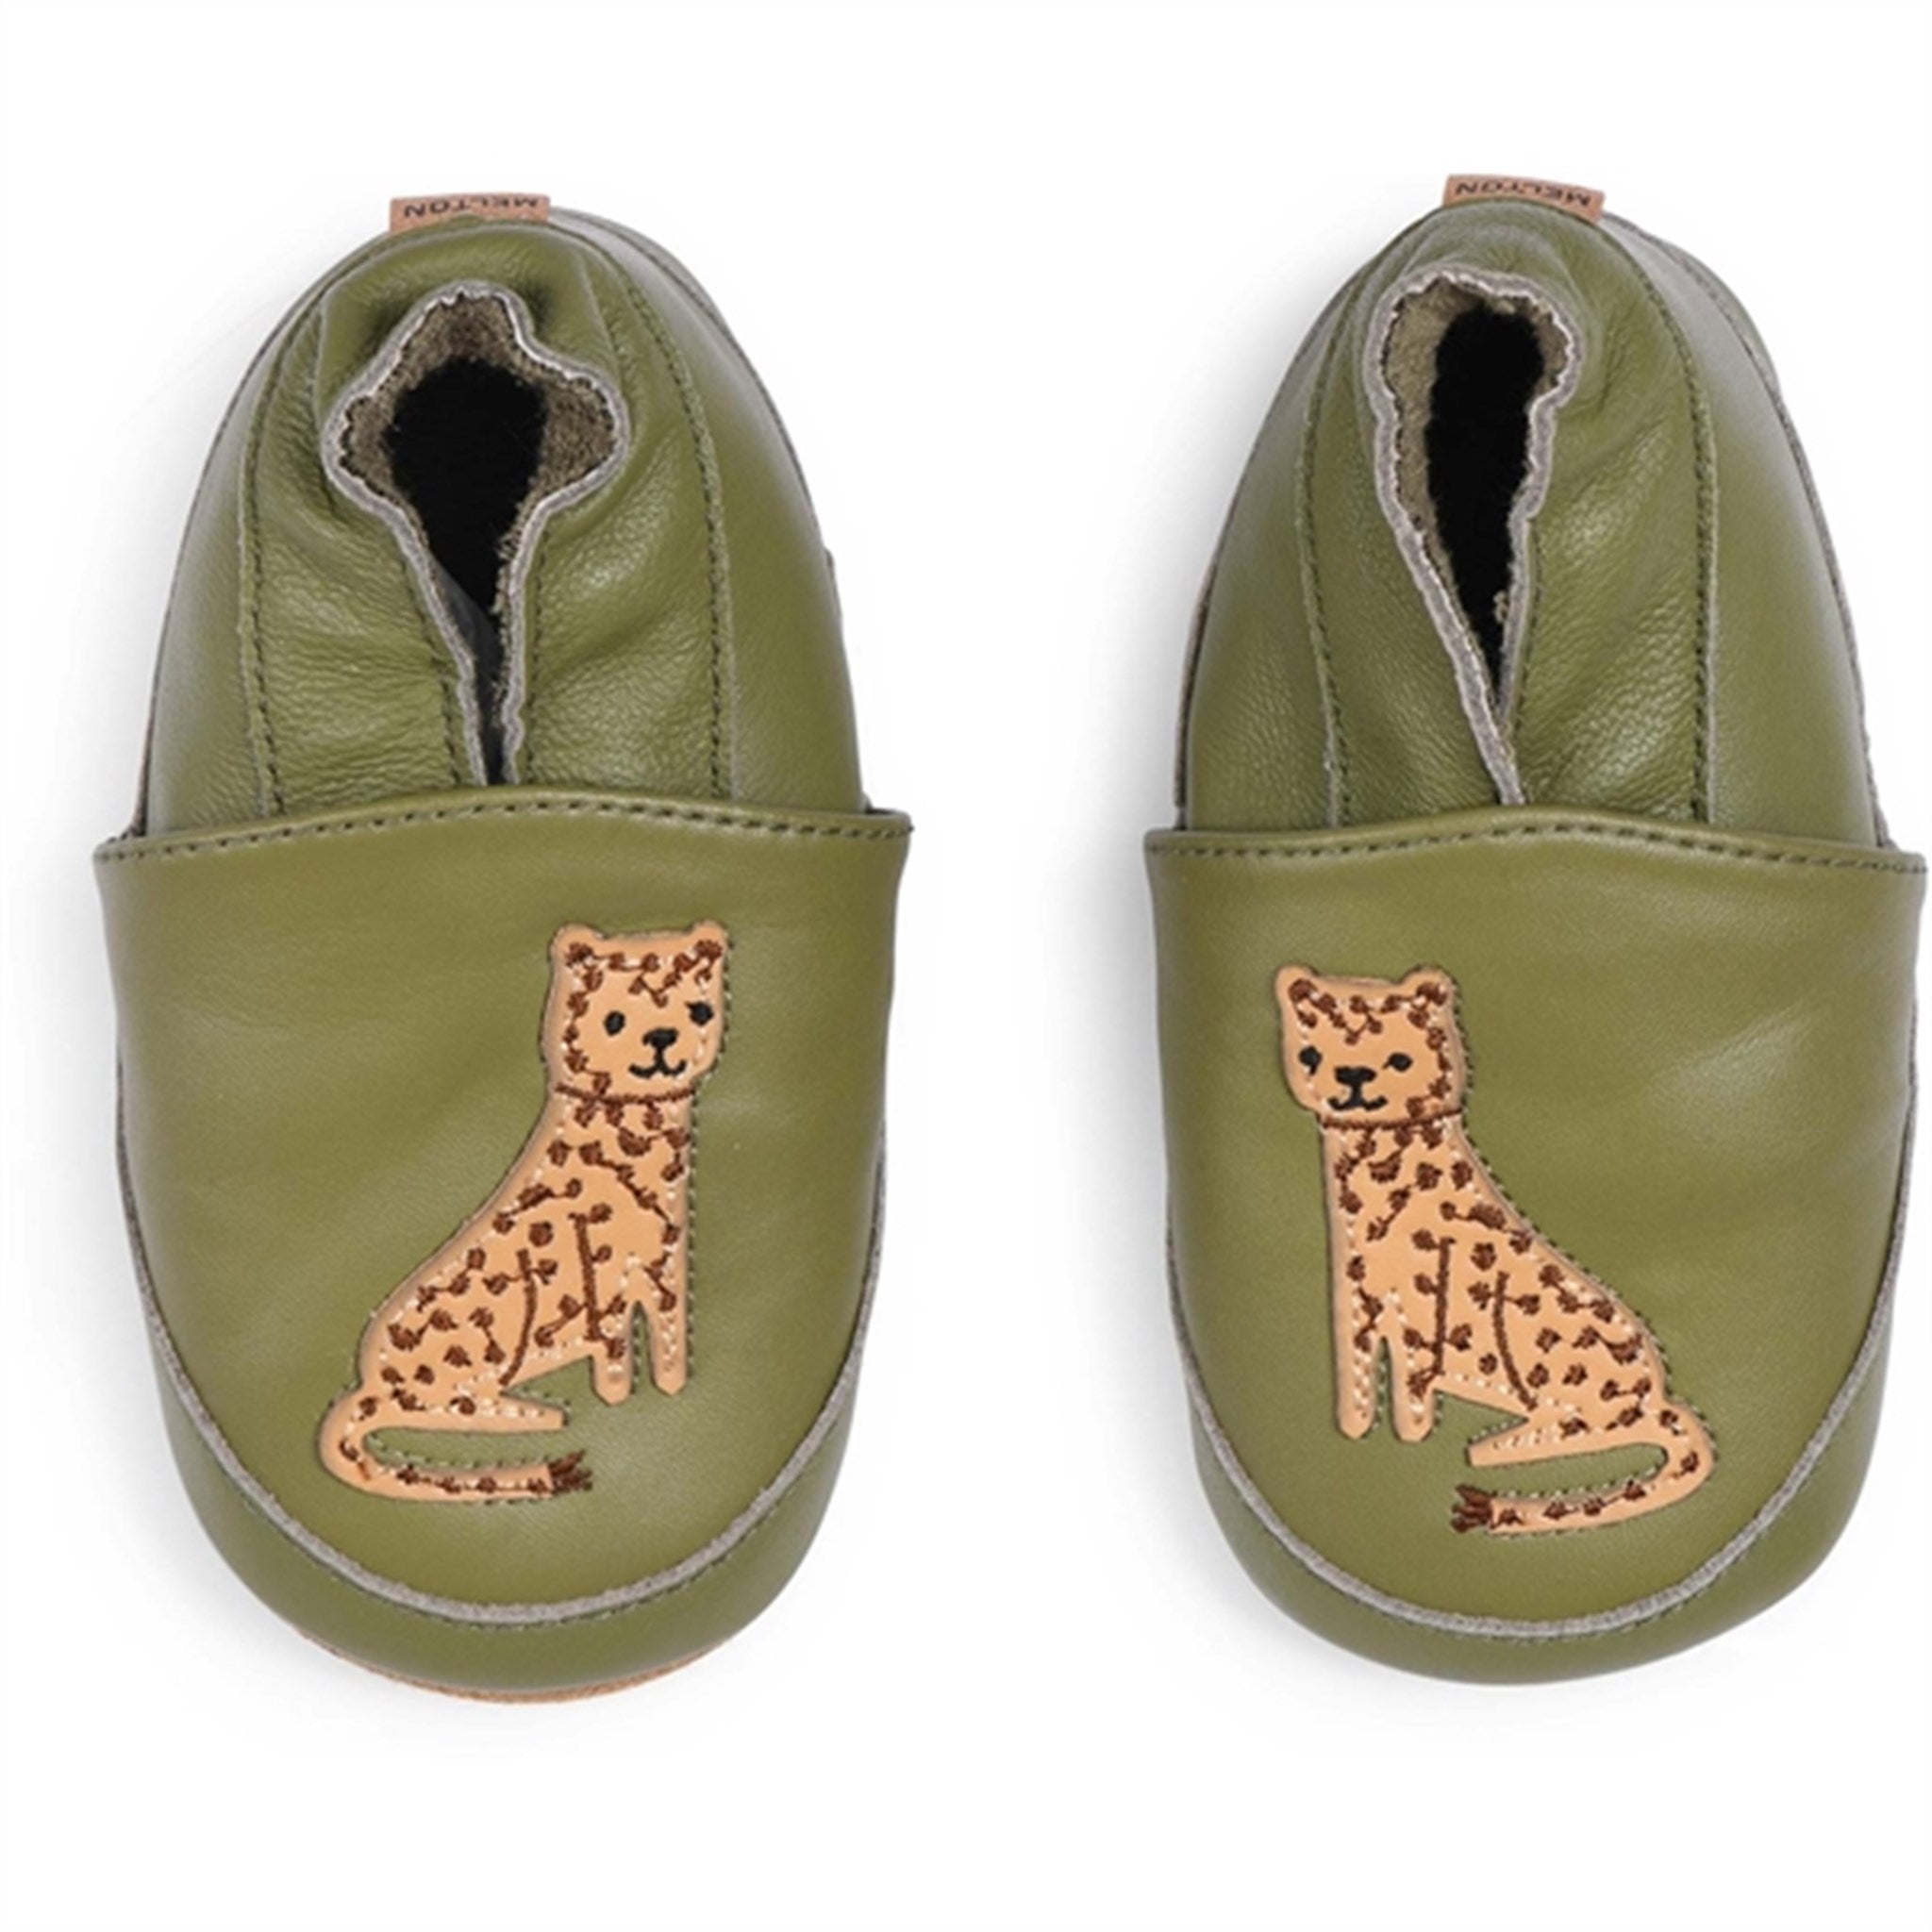 MELTON Leopard Leather Slippers Dried Herb 2